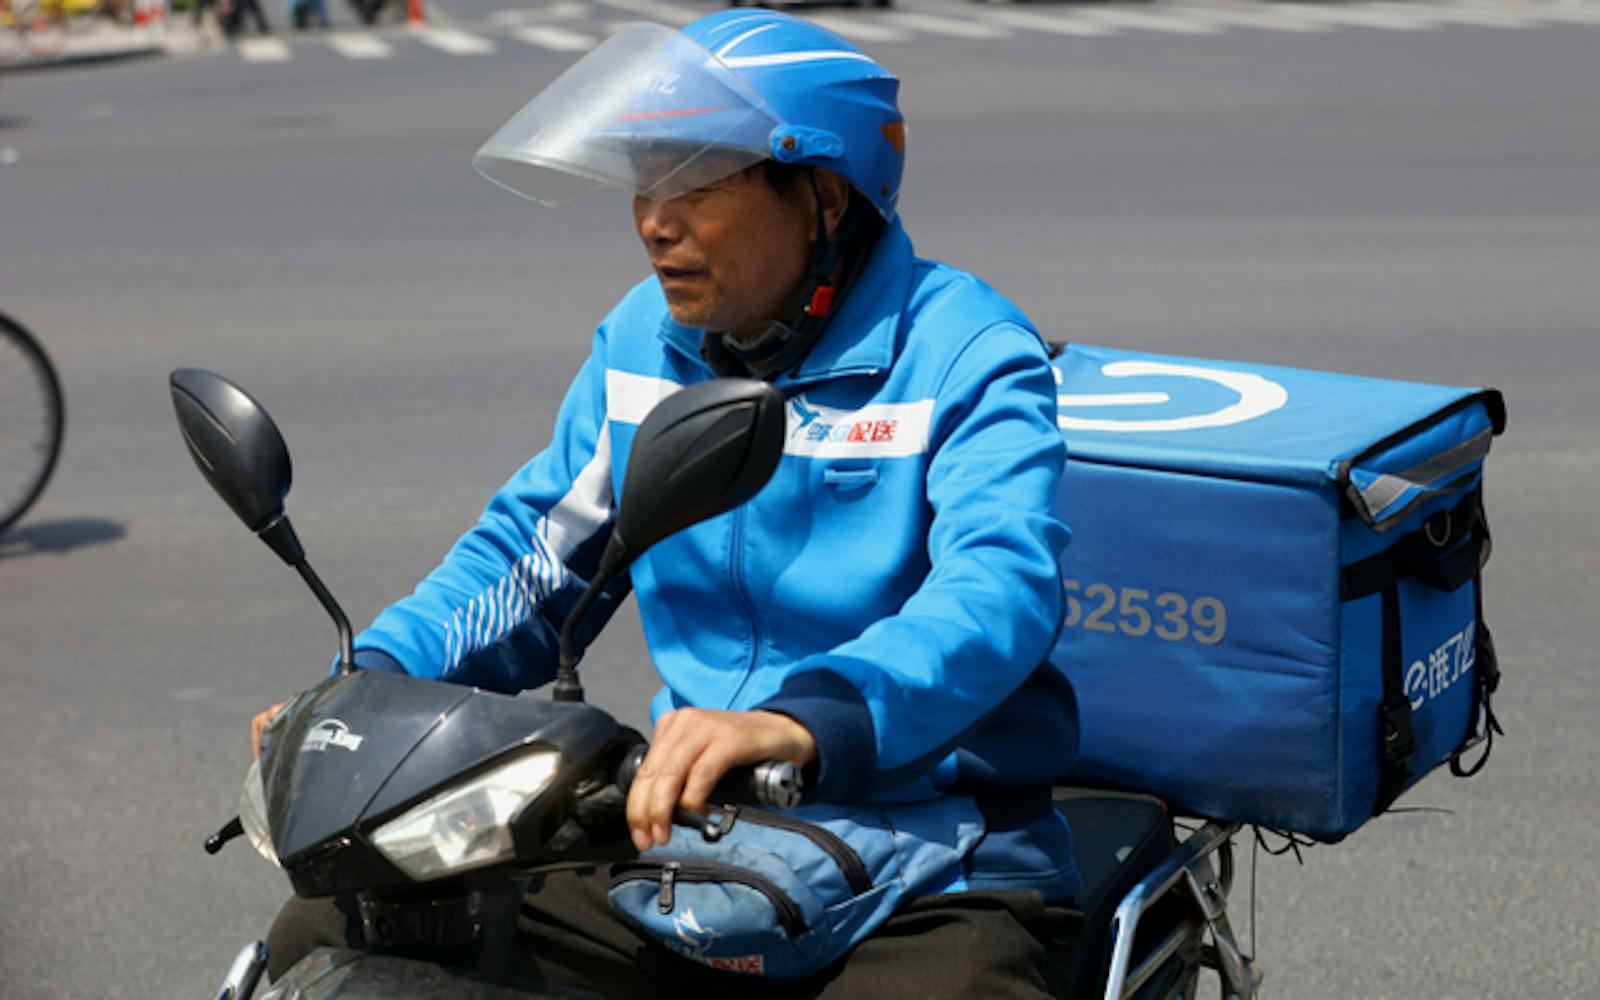 An Ele.me delivery courier in Shanghai in April. Photo by AP